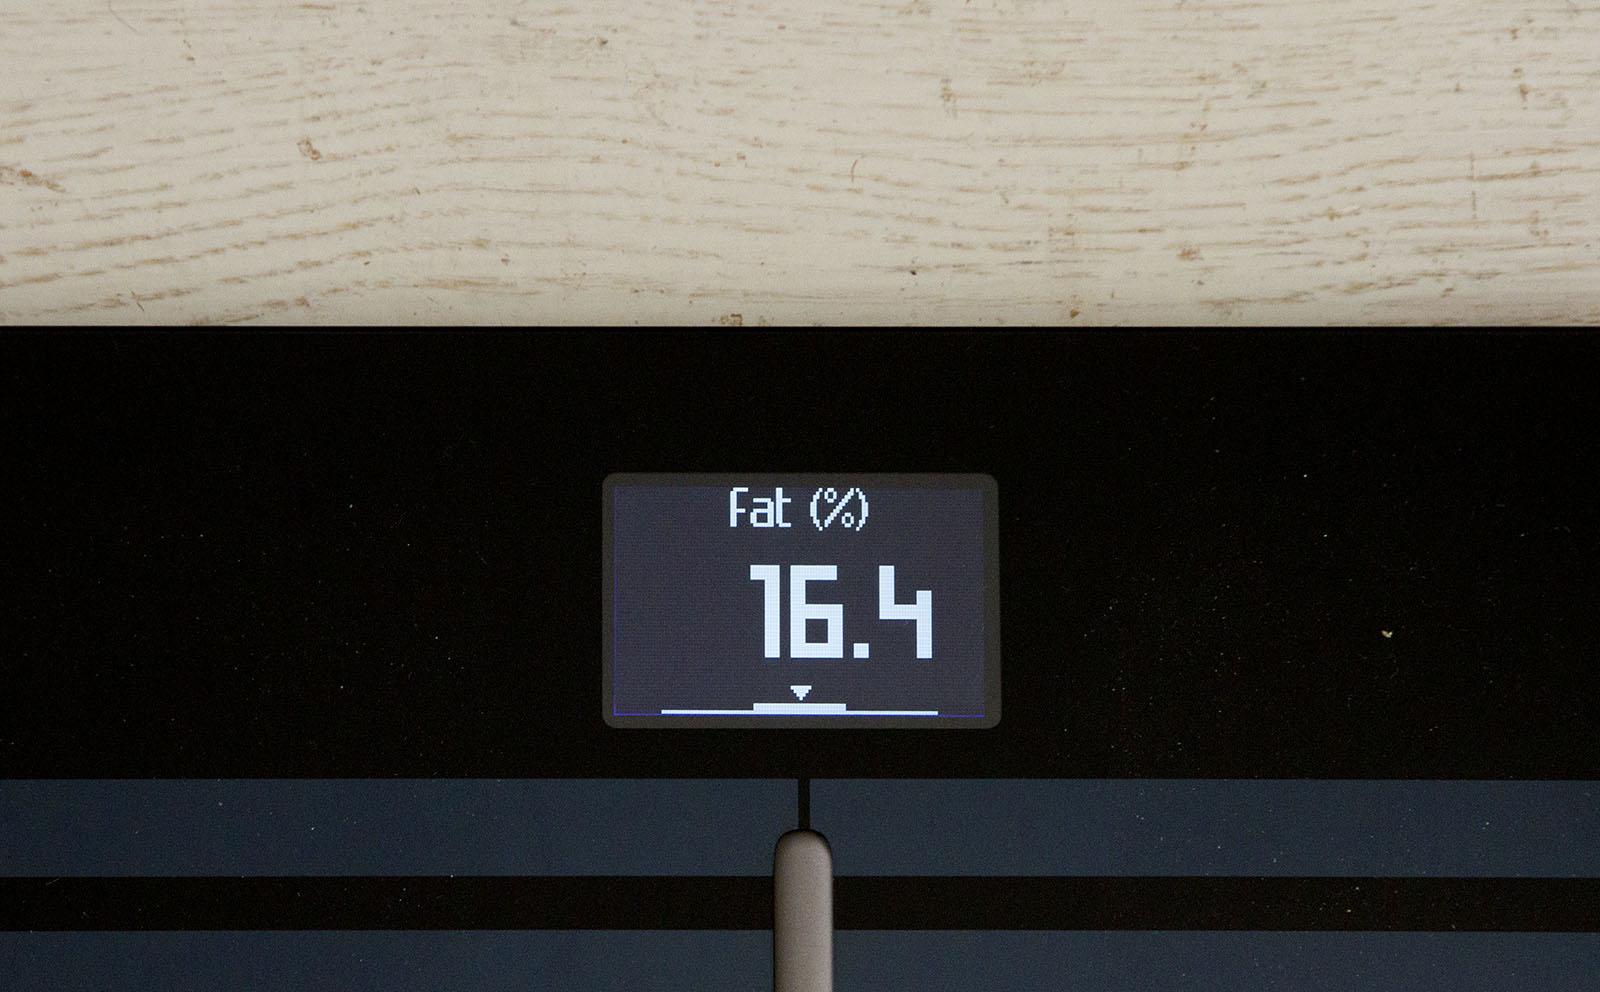 Withings Body Cardio review: A gorgeous smart scale that worries about your  cardiac health